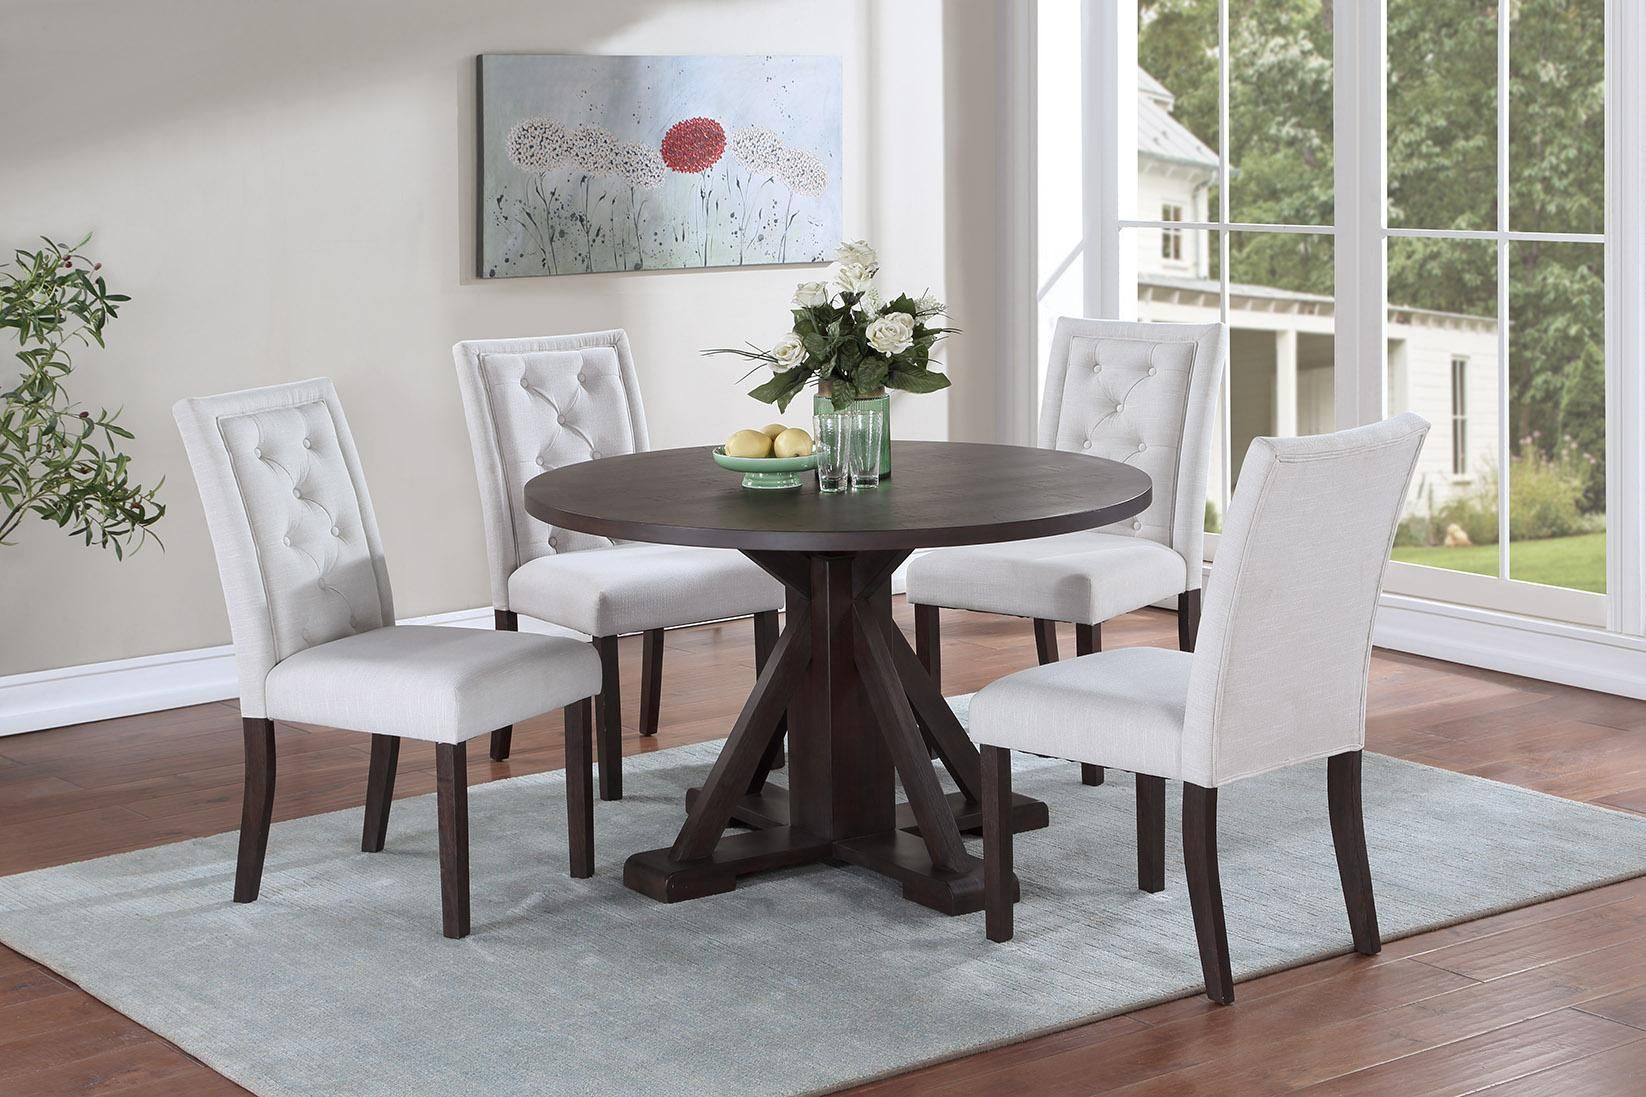 Sanford Round Dining Table Set With Ivory Chairs